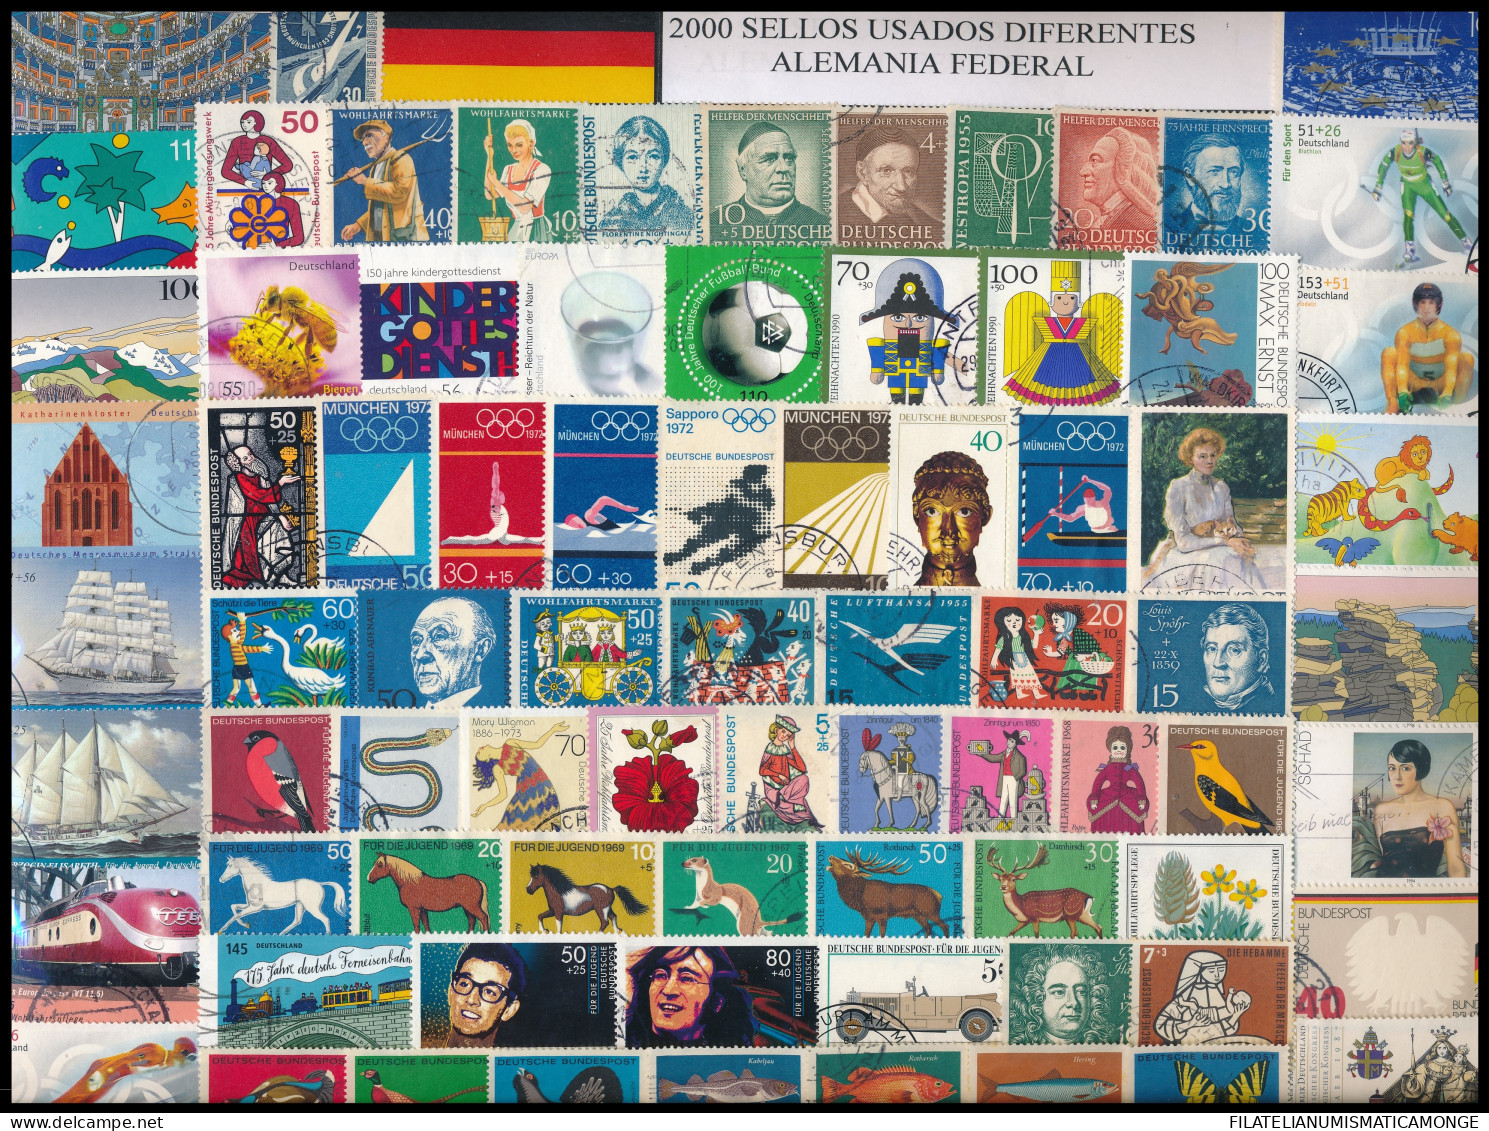  Offer - Lot Stamps - Paqueteria  Alemania / Federal 2000 Sellos Diferentes Ele - Vrac (min 1000 Timbres)